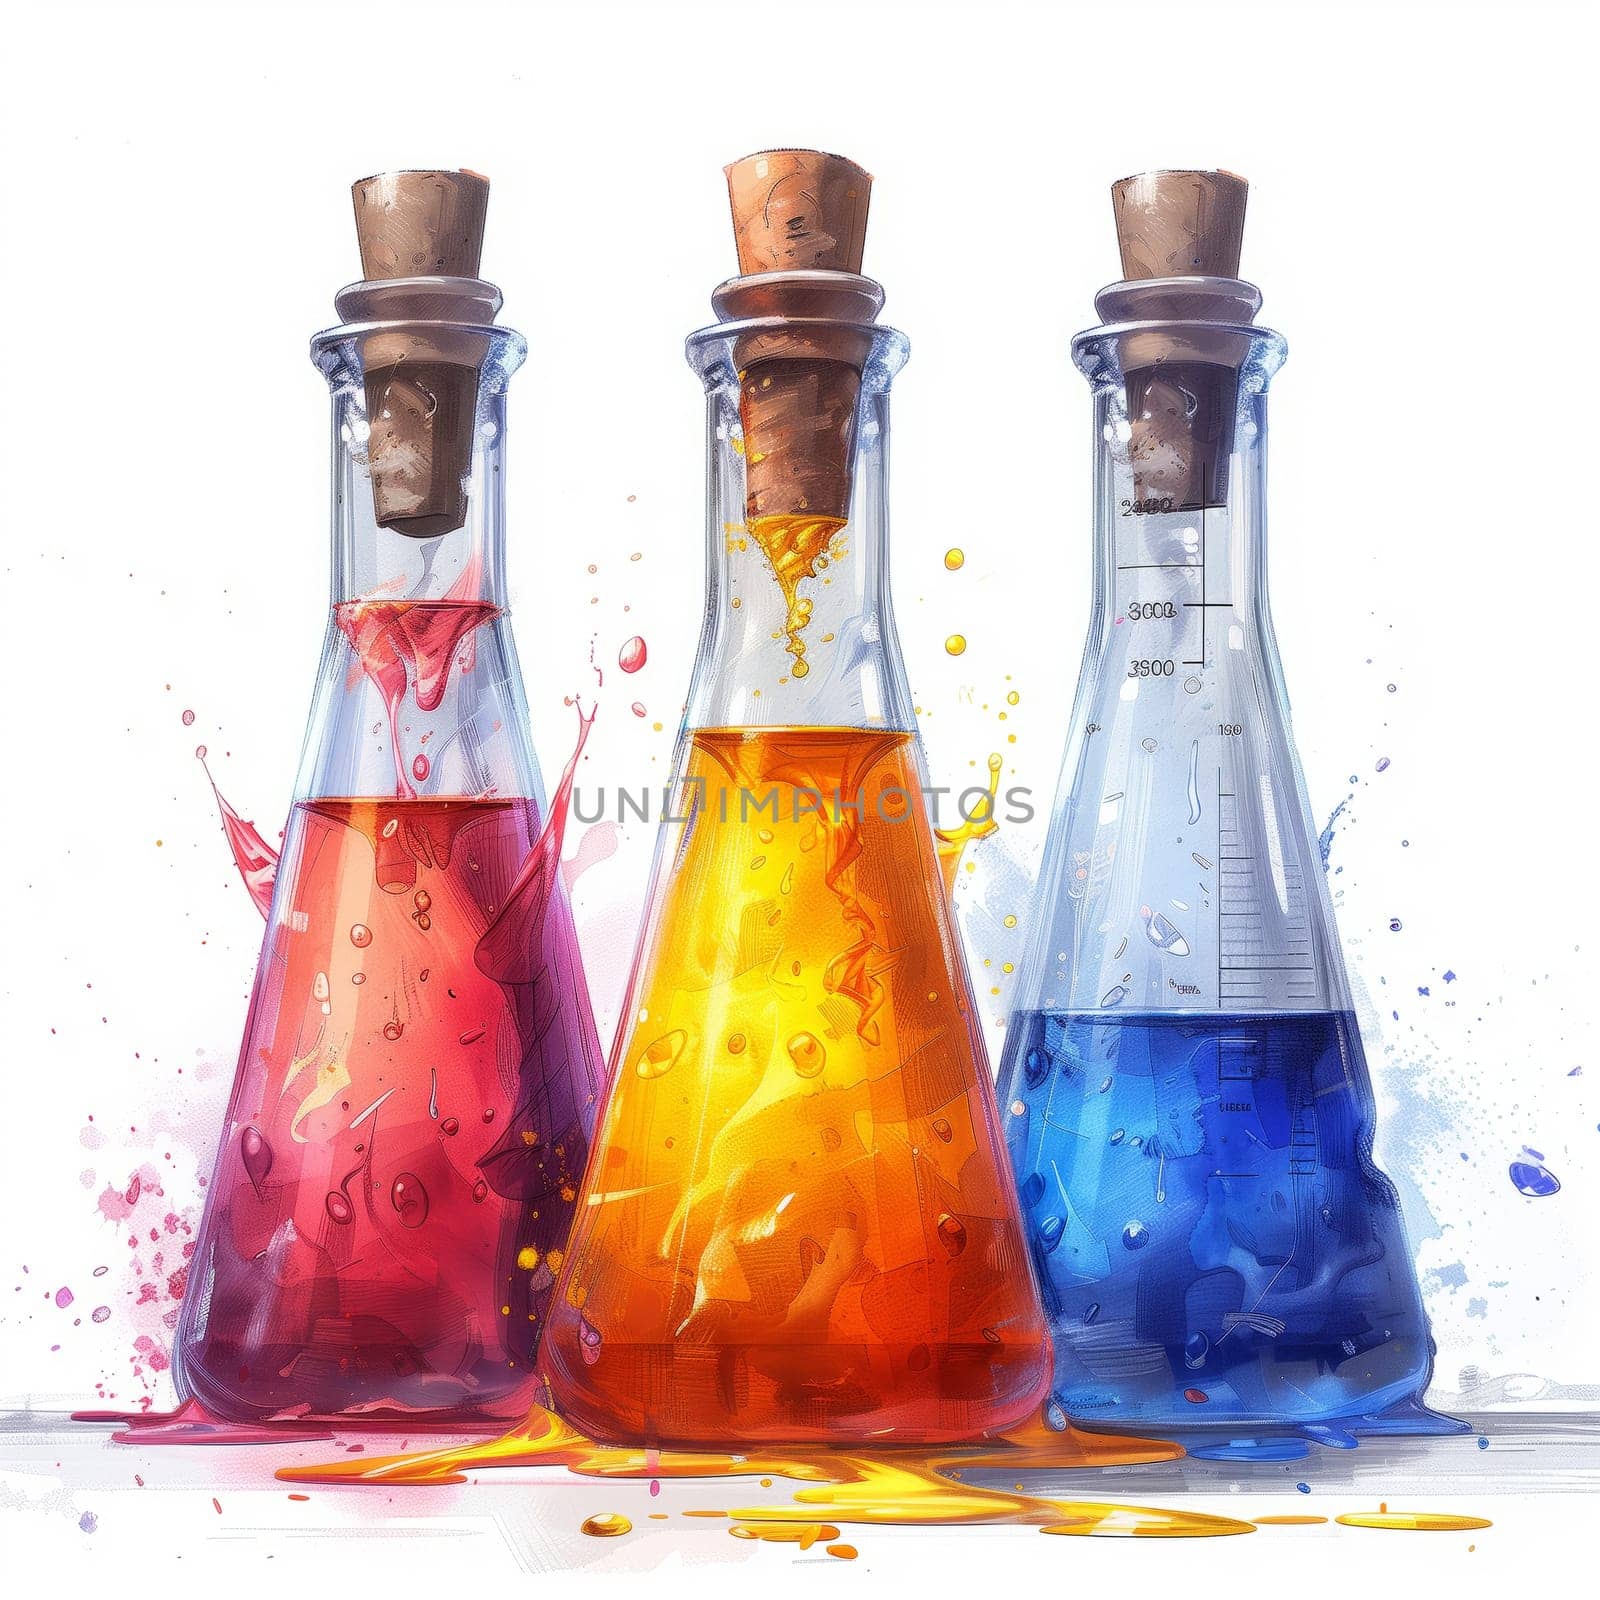 Three glass bottles filled with colorful liquids displayed on a white background, resembling art paint or alcoholic beverages